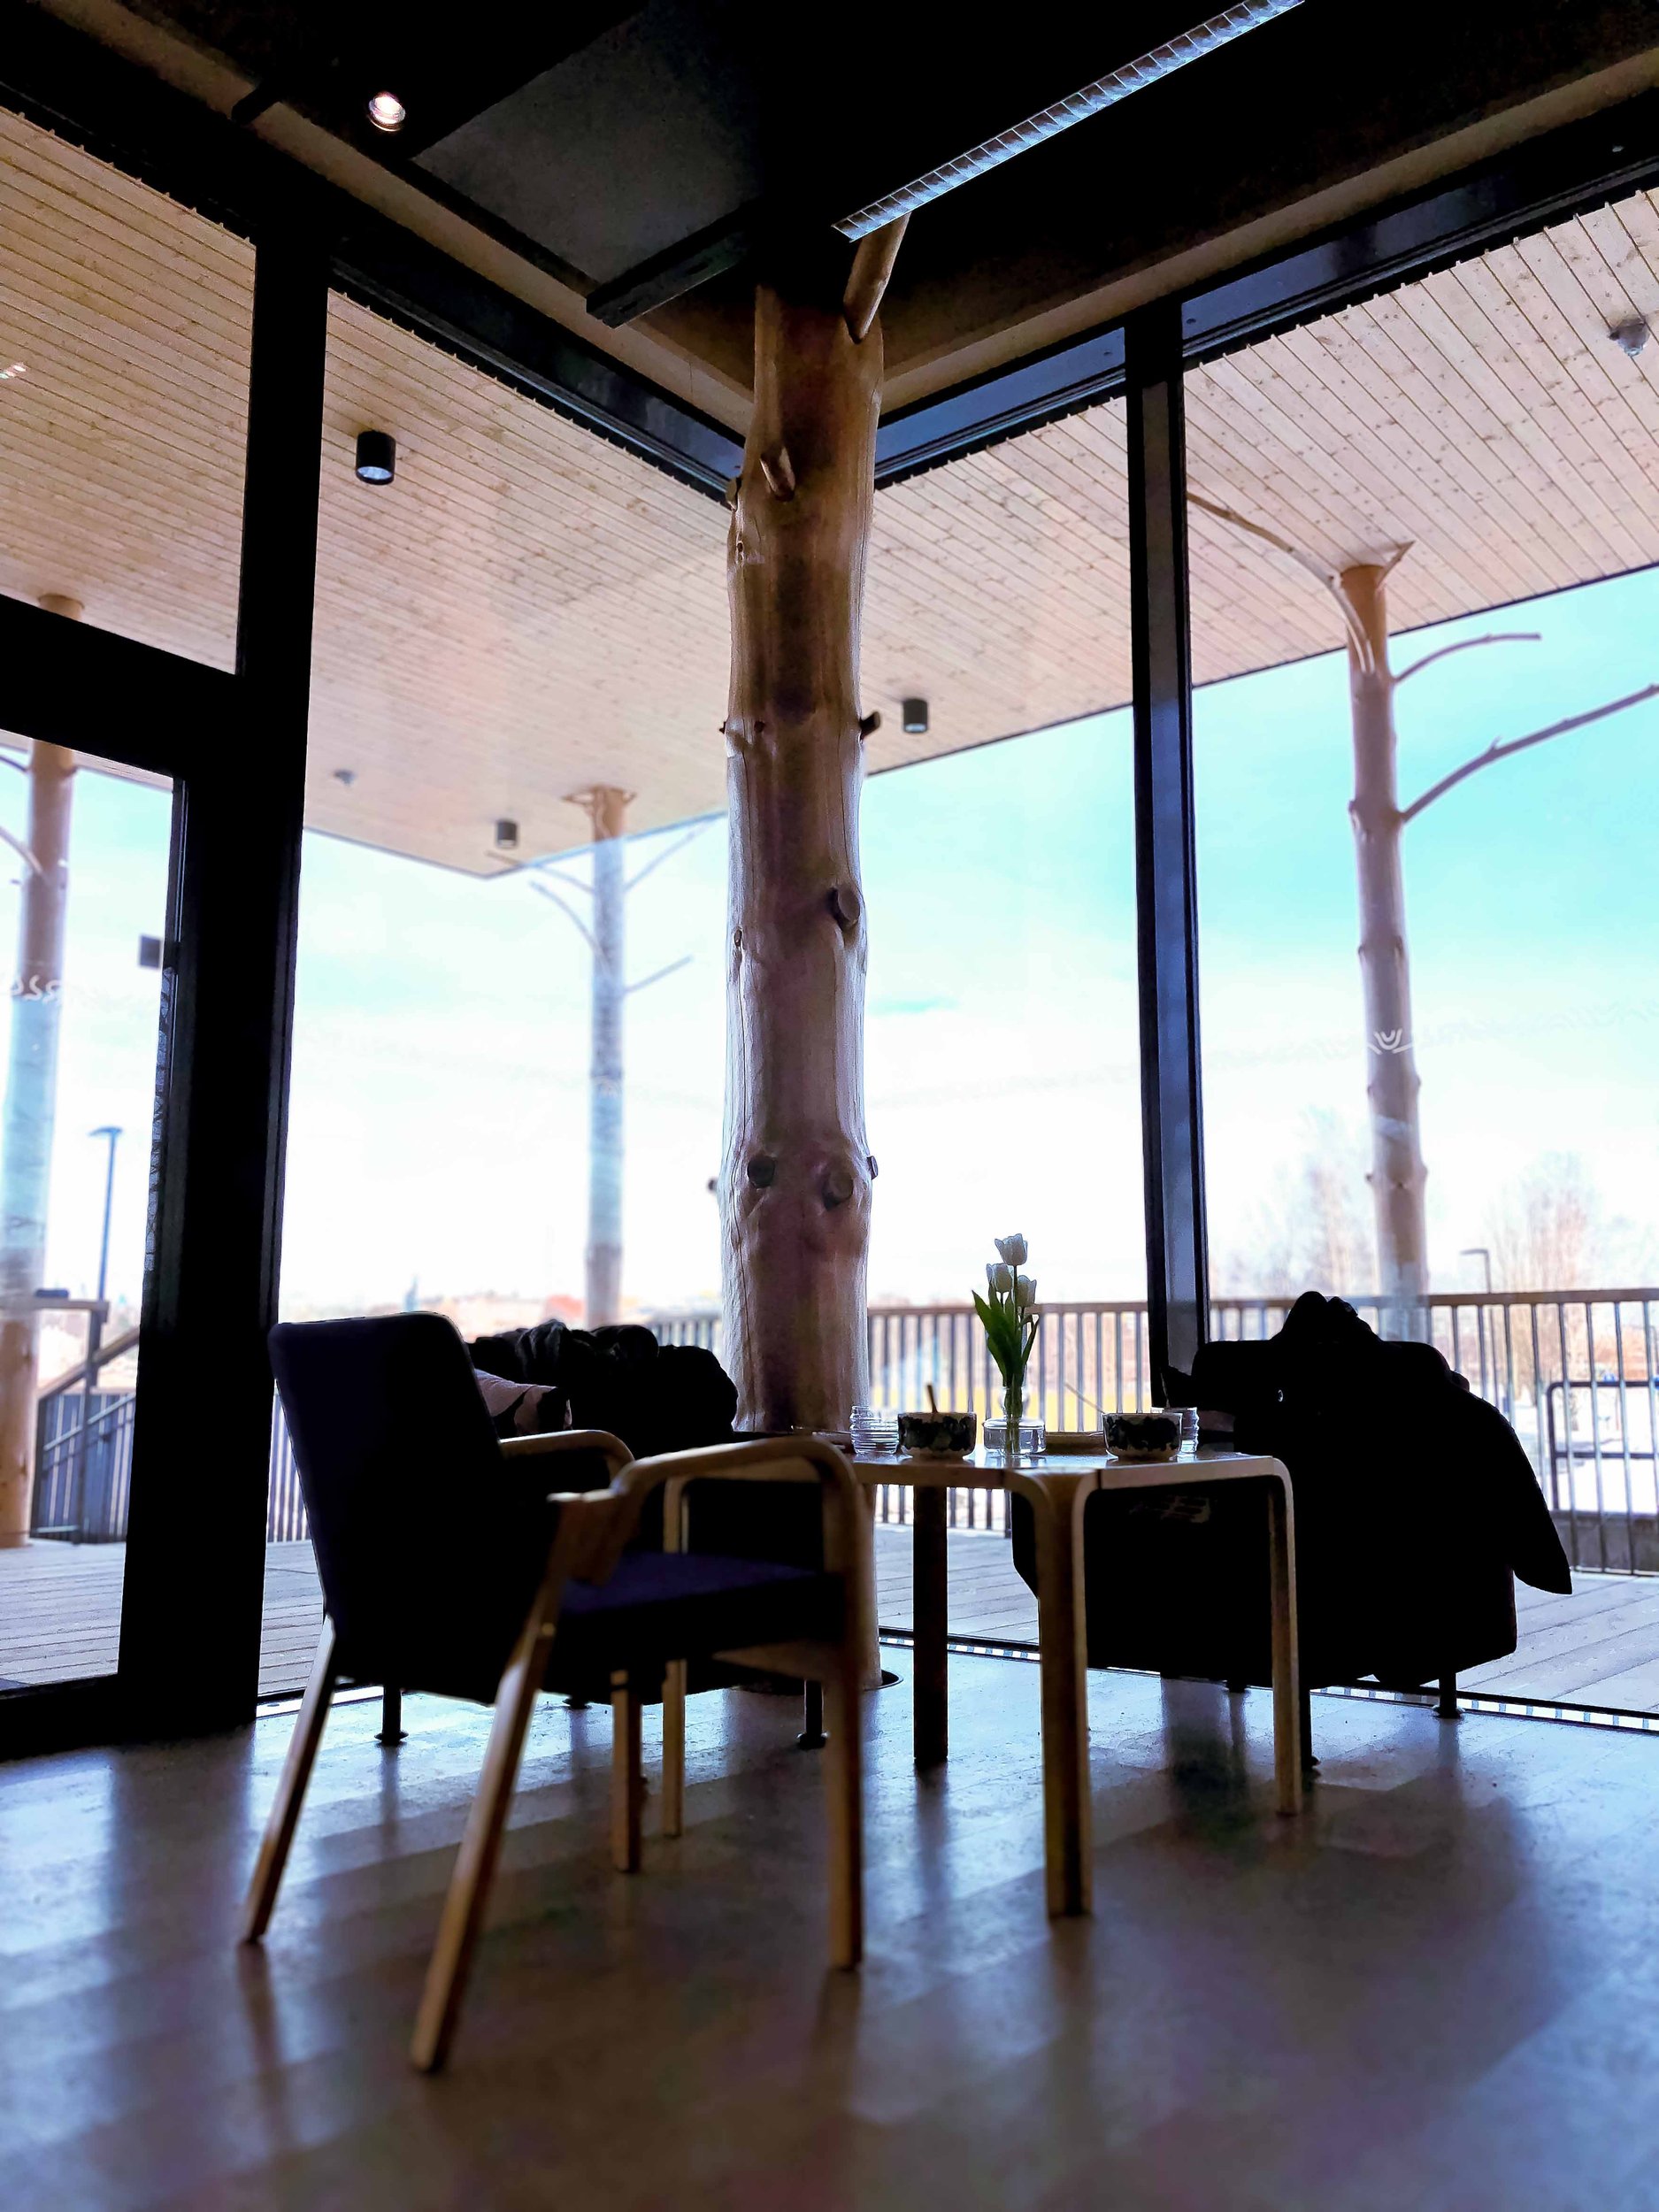 Corner table in the café. In the background, large windows and the landscape of early spring.